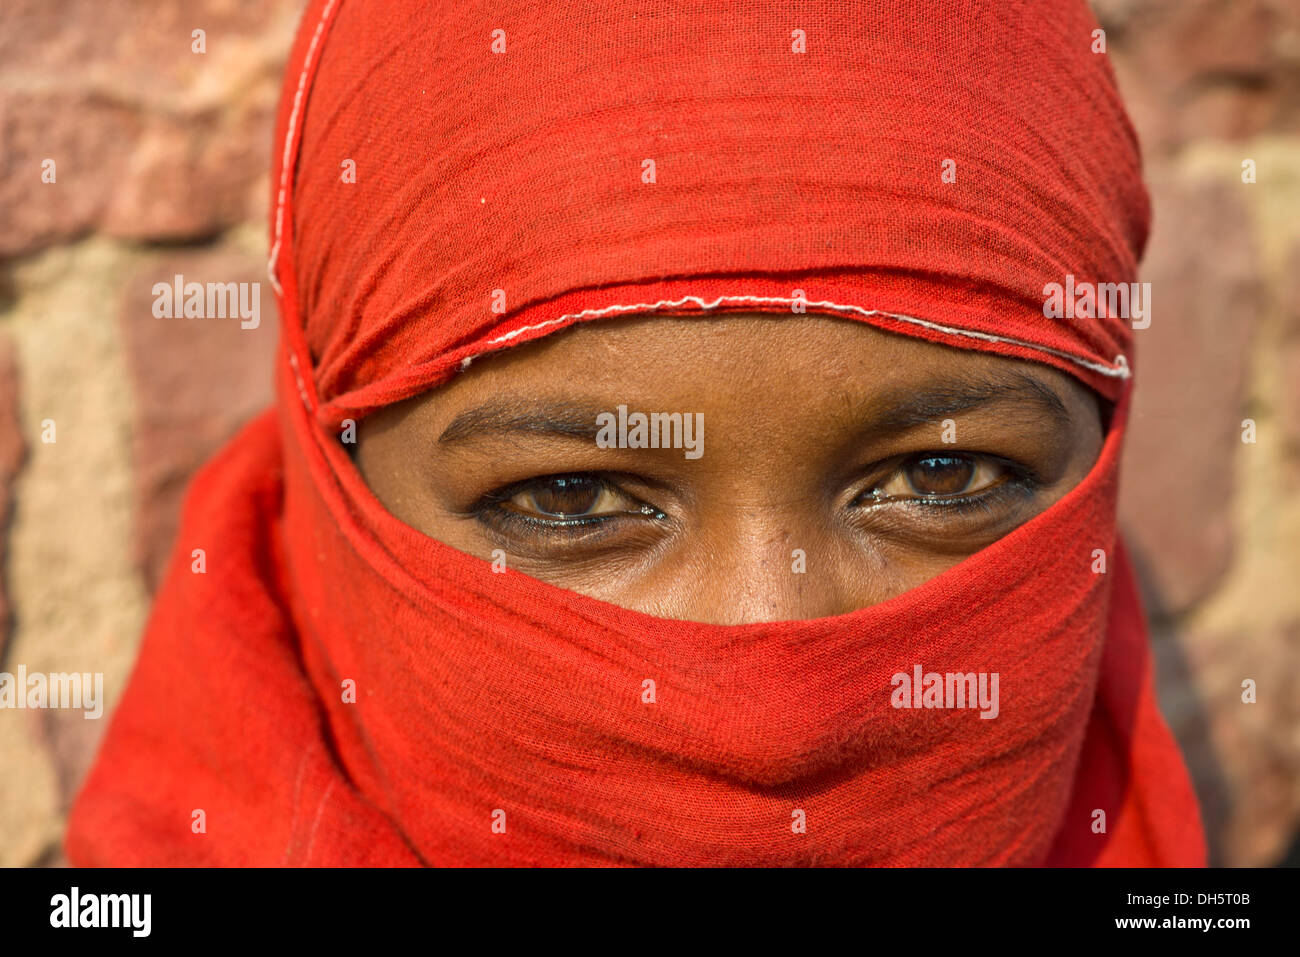 Young indian woman with a red veil, portrait, Fatehpur Sikri, Uttar Pradesh, India Stock Photo